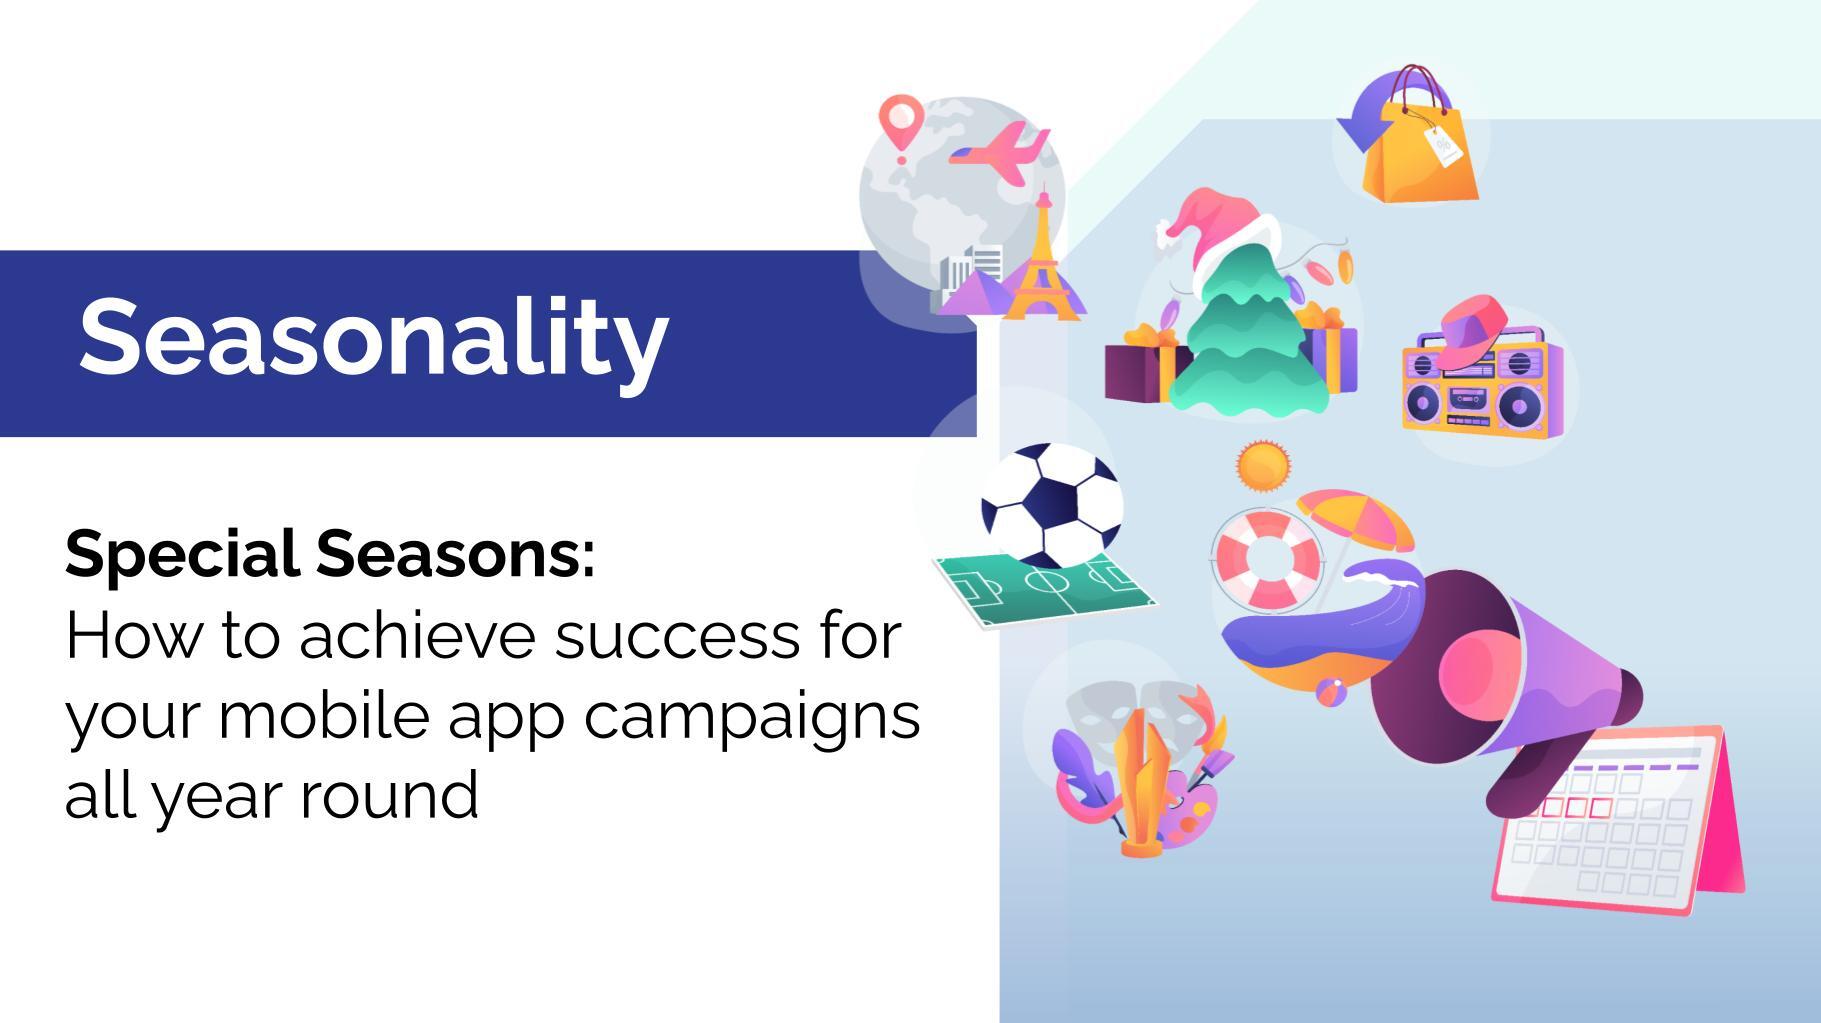 How to achieve success for your mobile app campaigns all year round